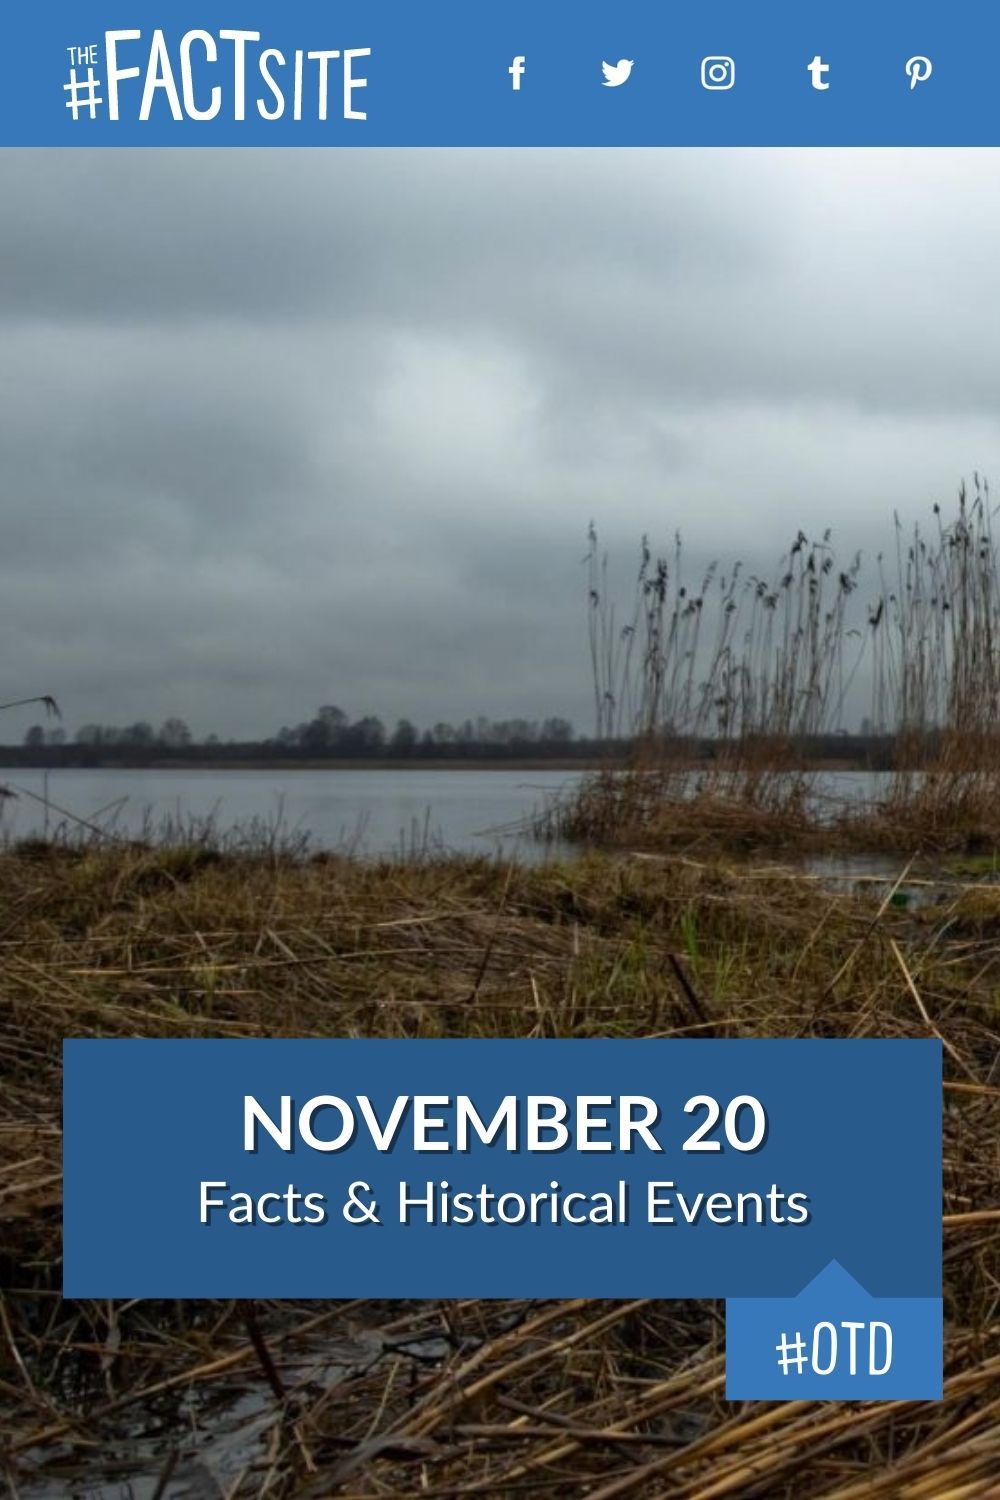 november-20-facts-historical-events-on-this-day-the-fact-site